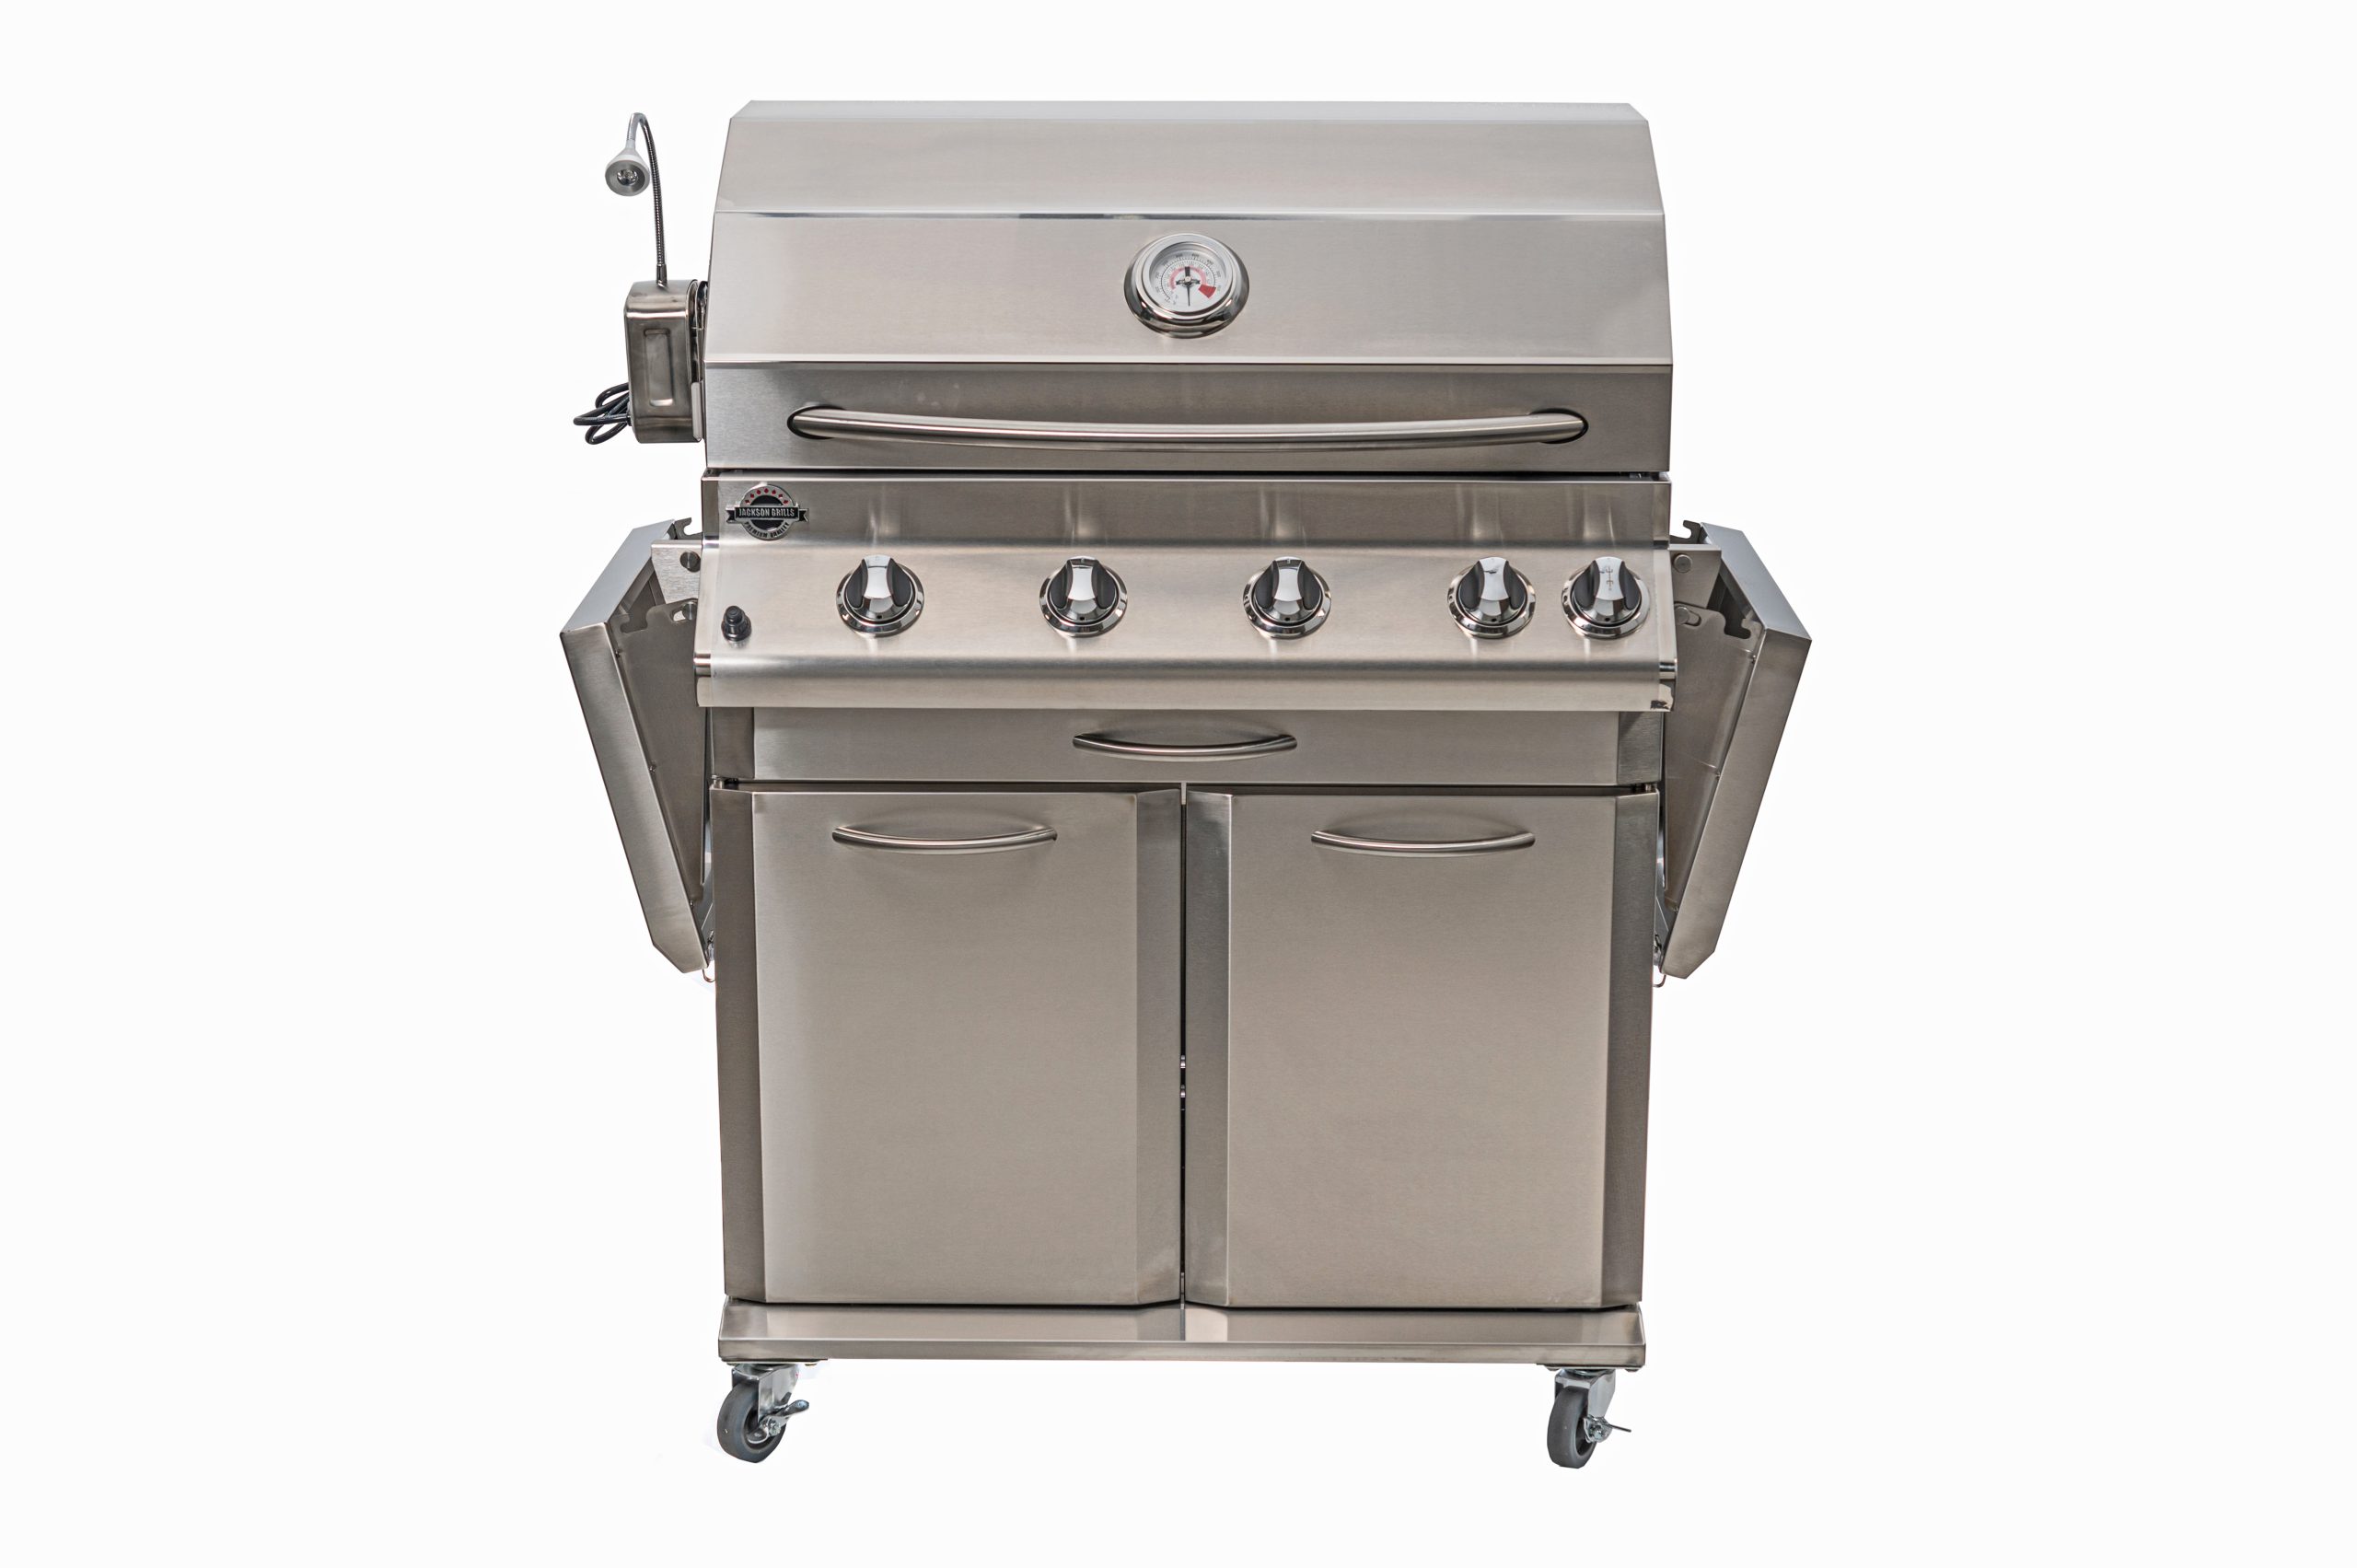 Jackson Grills - LUX 700 STAINLESS STEEL GAS GRILL CART